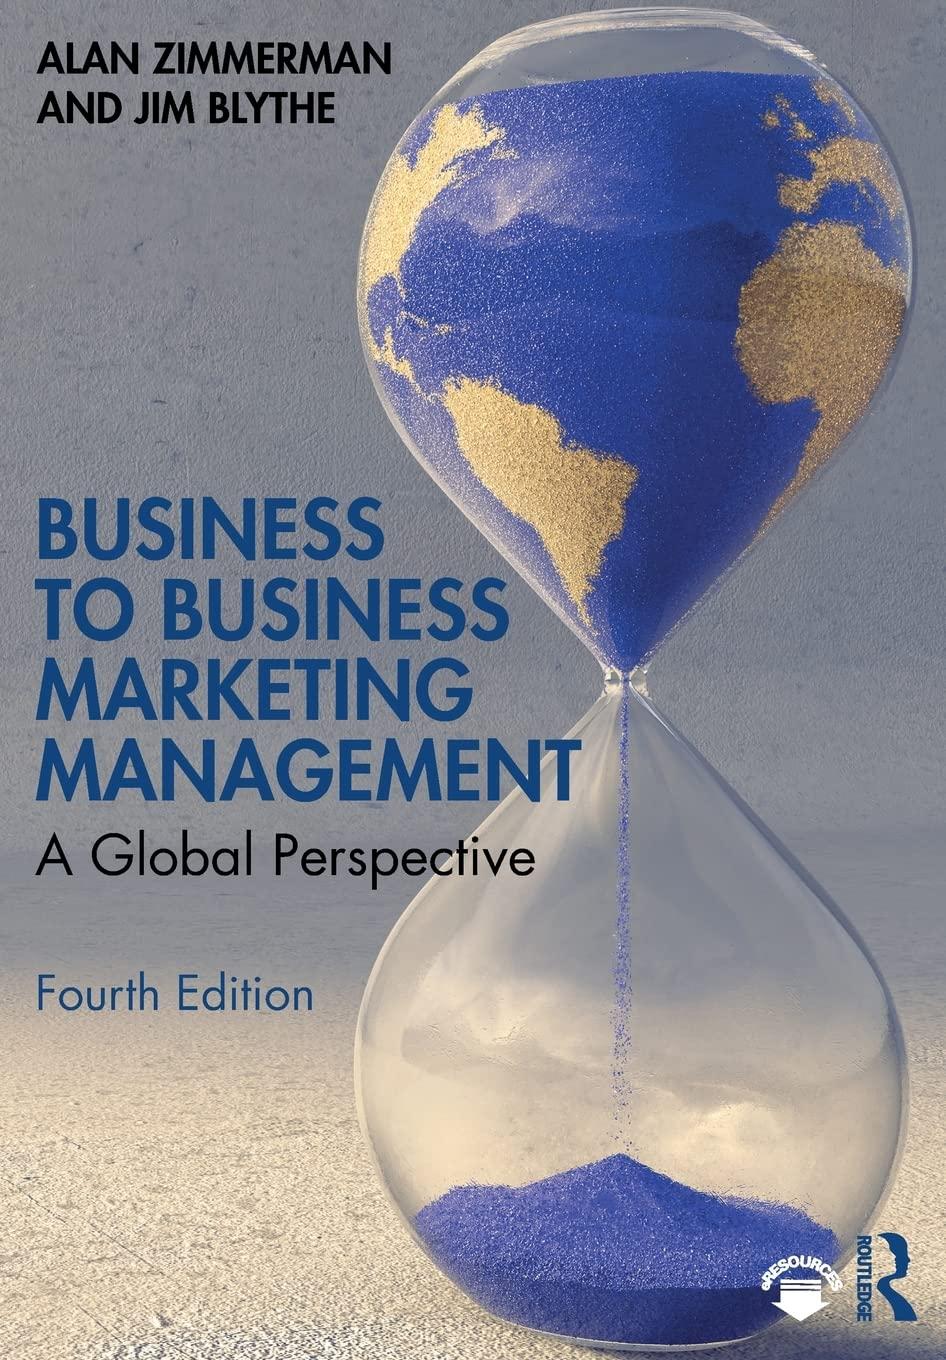 business to business marketing management a global perspective 4th edition alan zimmerman, jim blythe